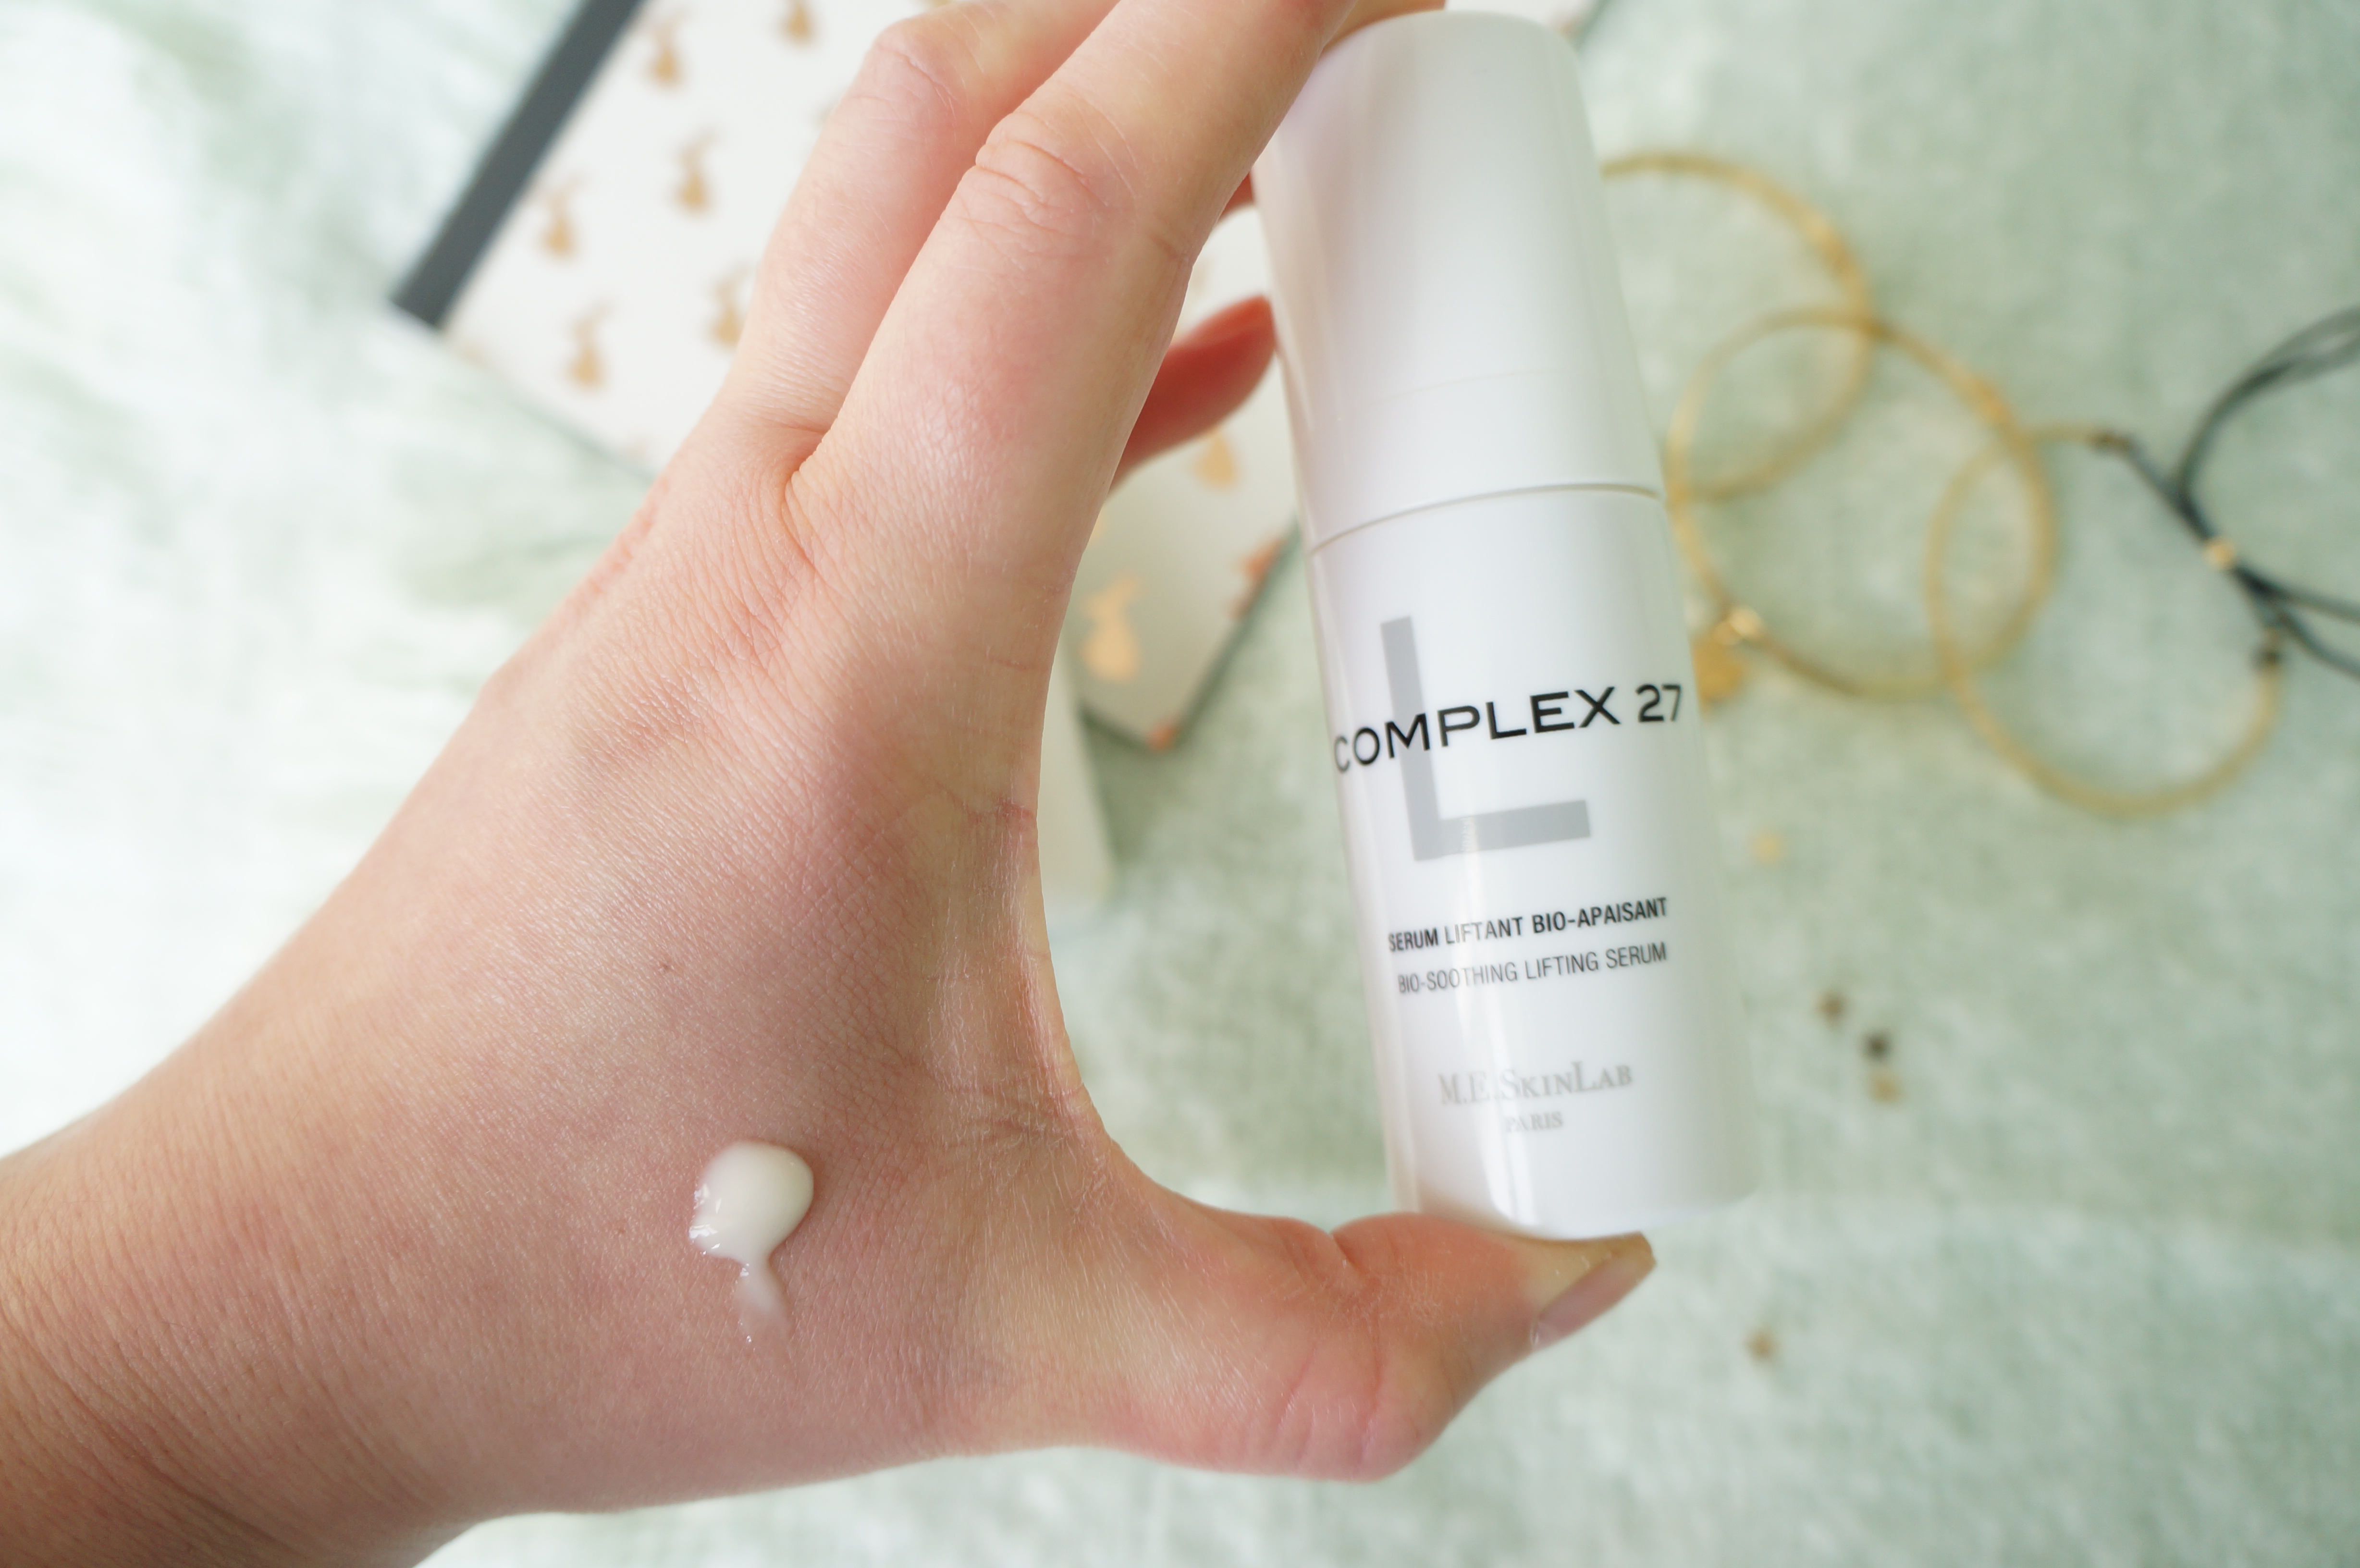 Complex L by Cosmetics 27 / Pic by 1FDLE.